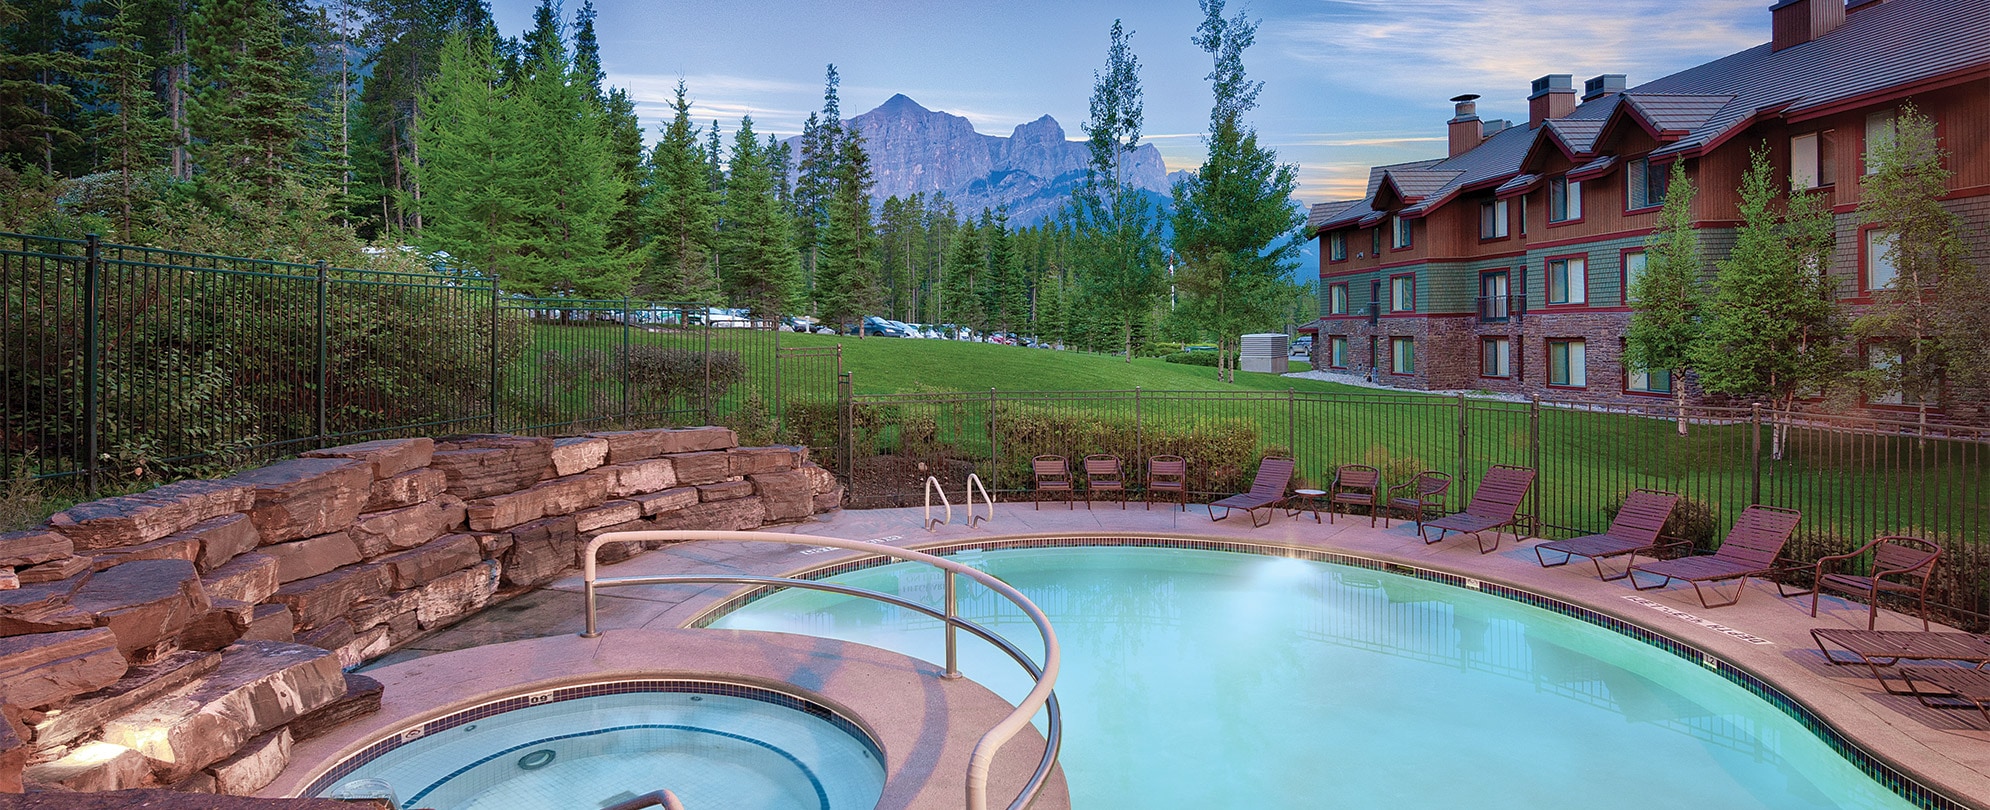 The outdoor pool and hot tub at WorldMark Canmore Banff, a timeshare resort, with the Canadian Rocky Mountains in the distance.